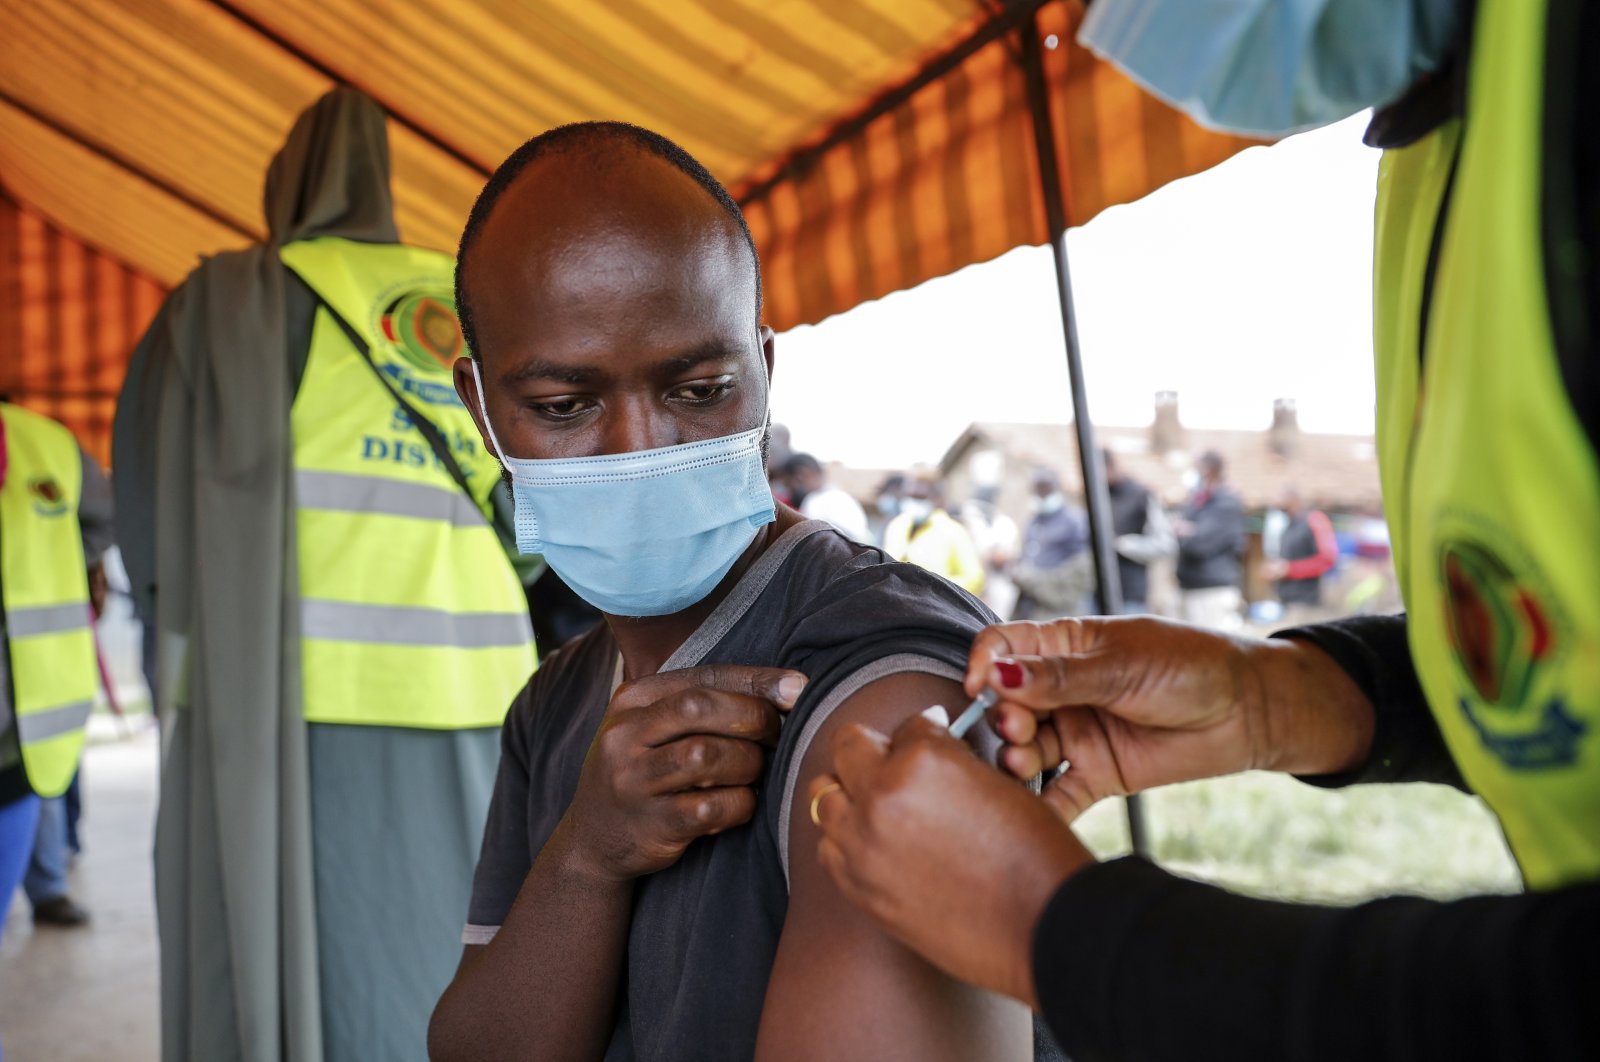 A Kenyan man receives a dose of the AstraZeneca COVID-19 vaccine donated by Britain, at the Makongeni Estate in Nairobi, Kenya, Aug. 14, 2021. (AP Photo)